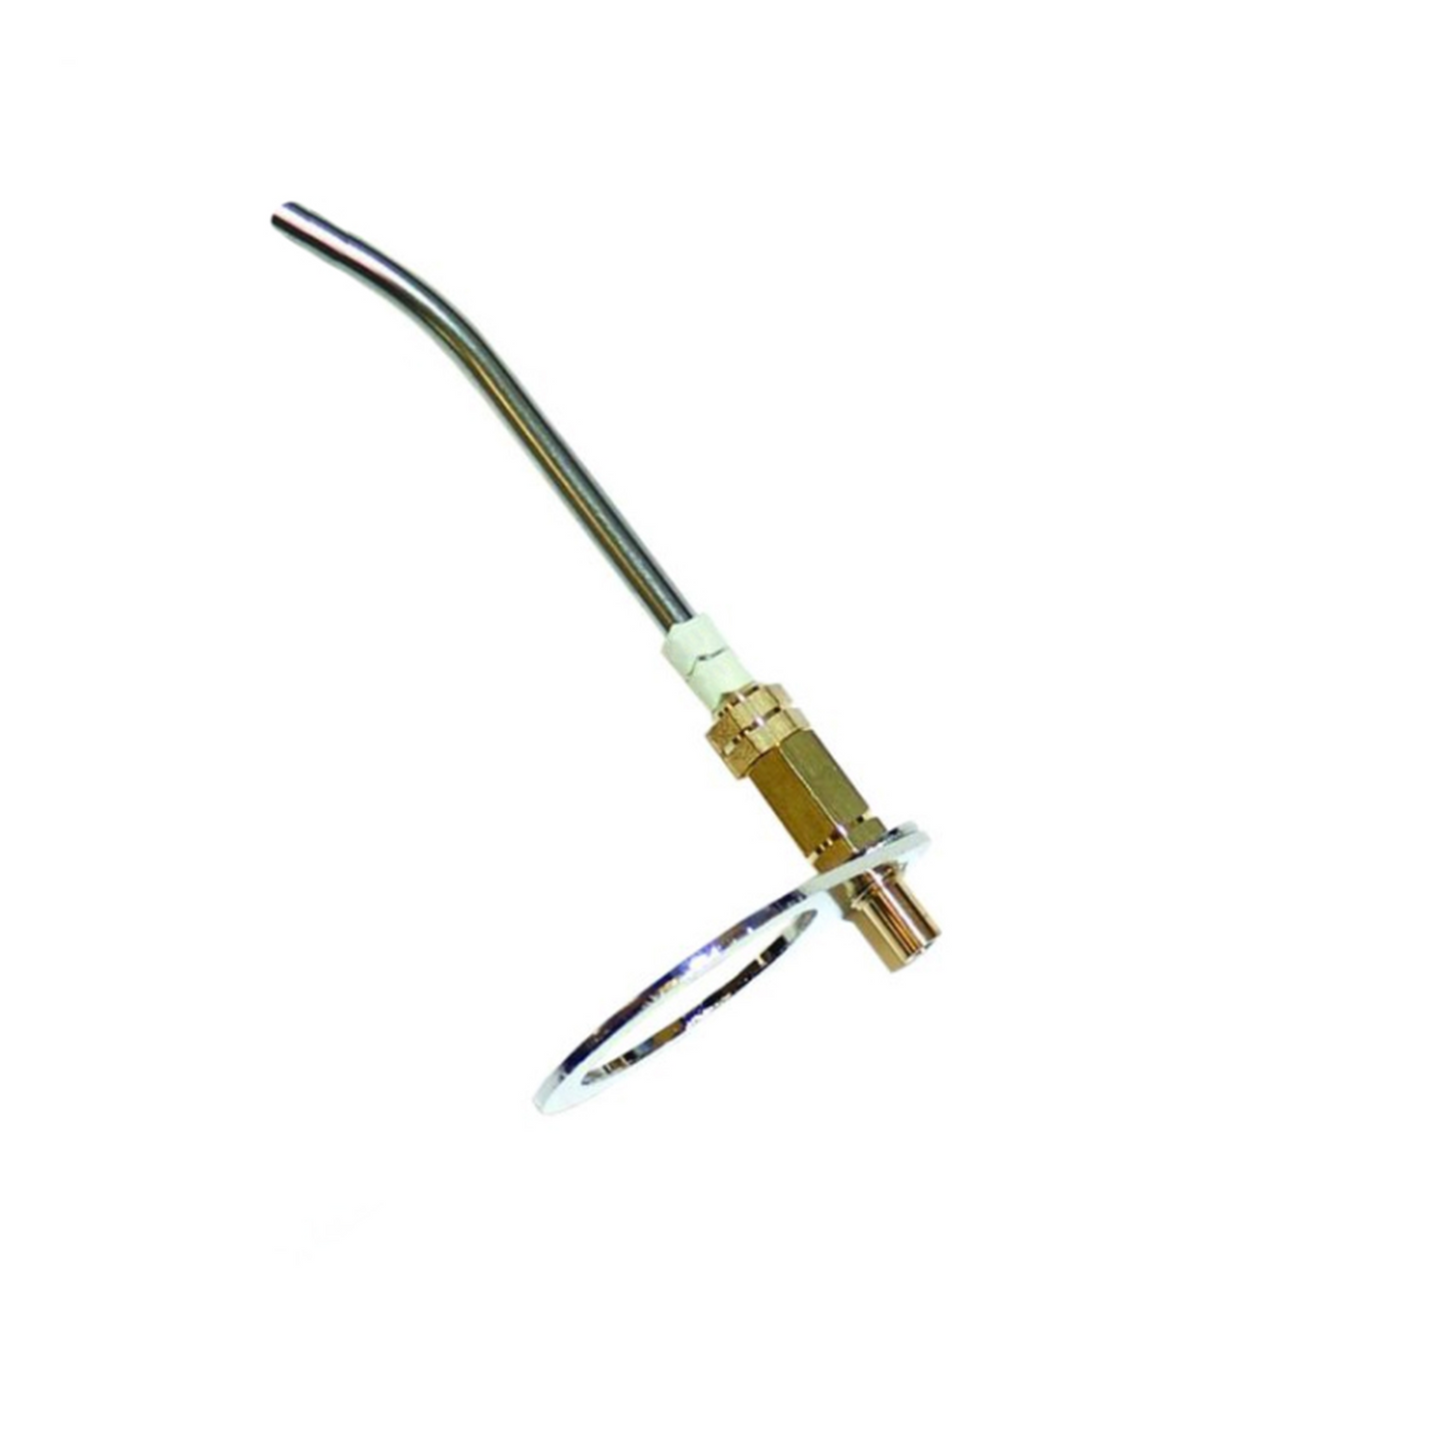 Hakko Products_ B2146 Feed pipe assembly 0.6MM_ Soldering Accessories_ Hakko Products